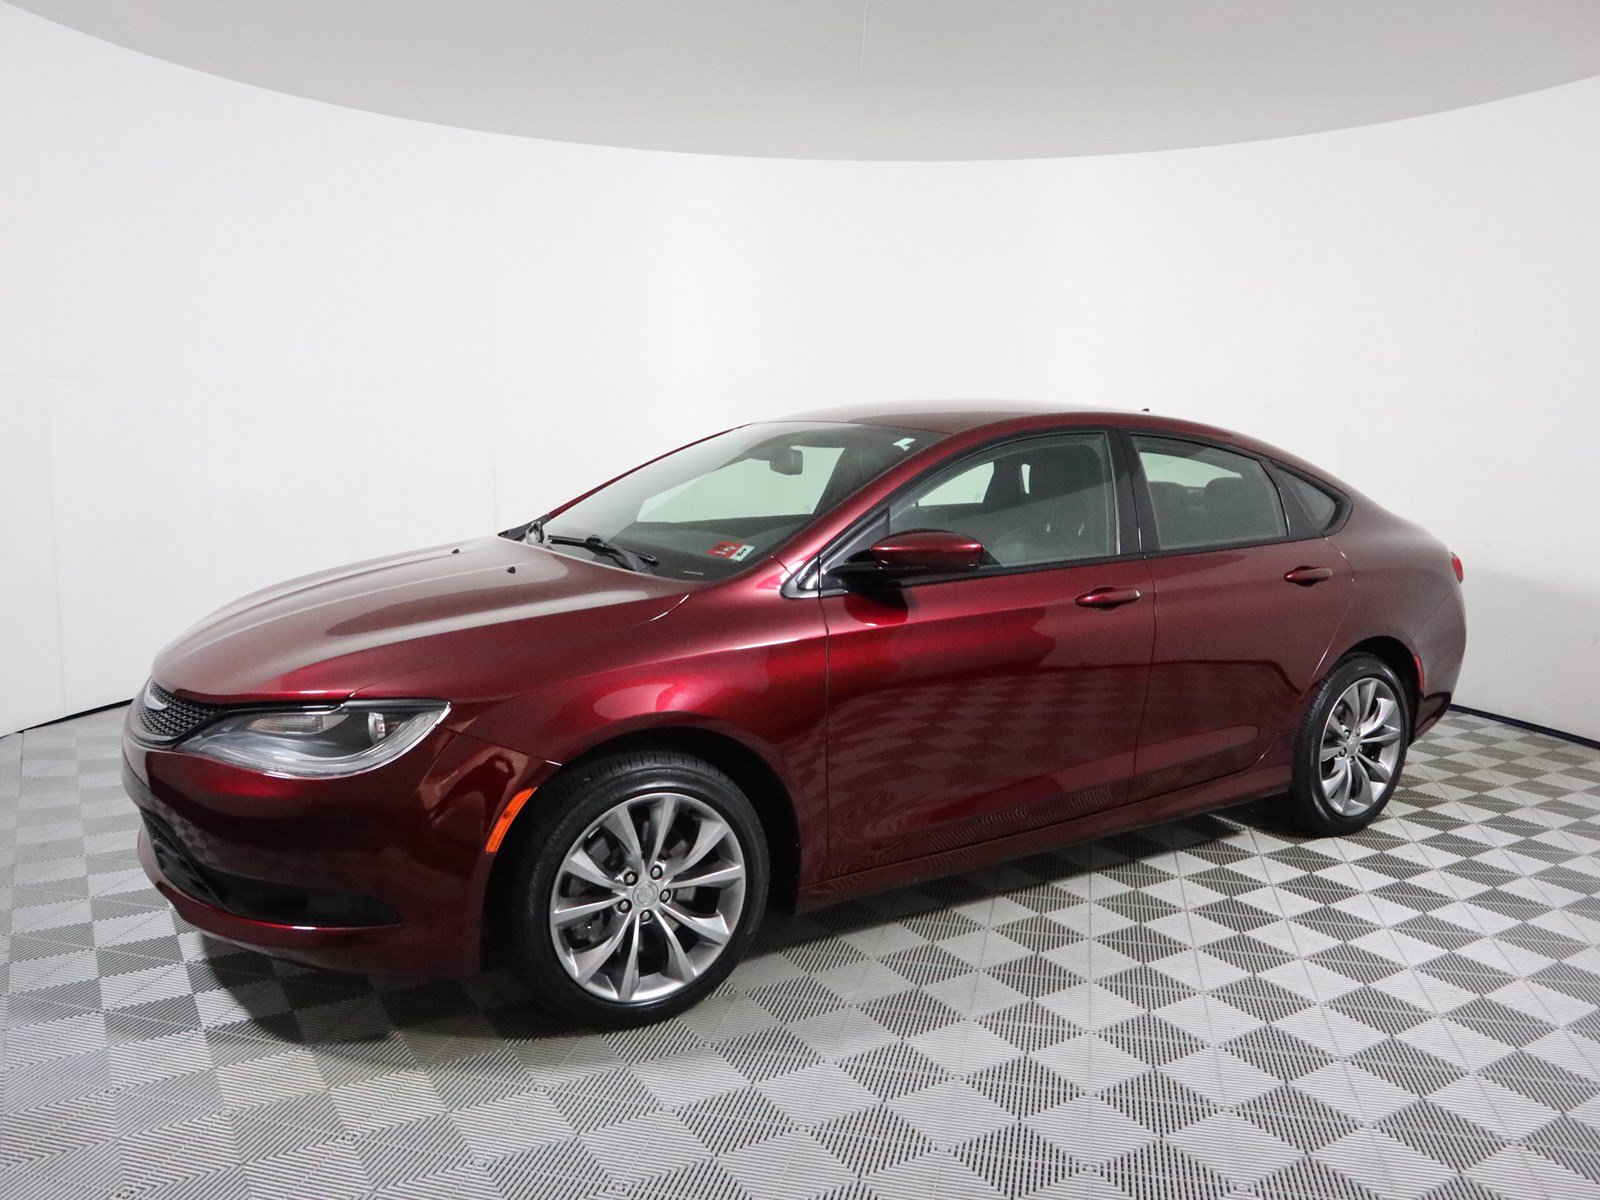 PreOwned 2015 Chrysler 200 S 4dr Car in Parkersburg 